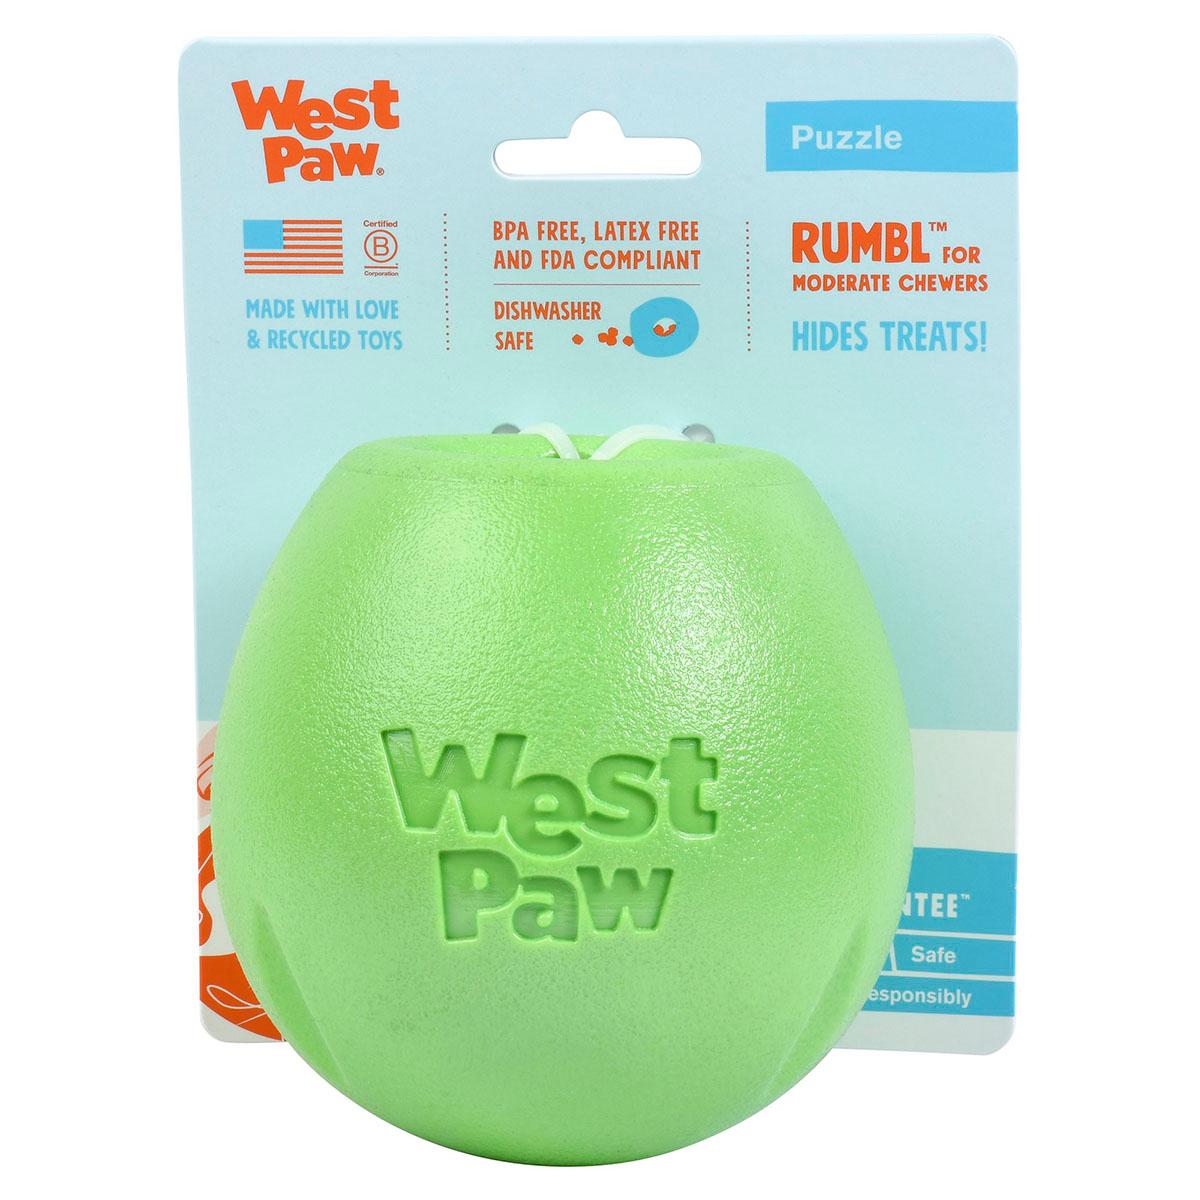 https://images.baxterboo.com/global/images/products/large/rumbl-dog-toywest-paw-jungle-green-3141.jpg